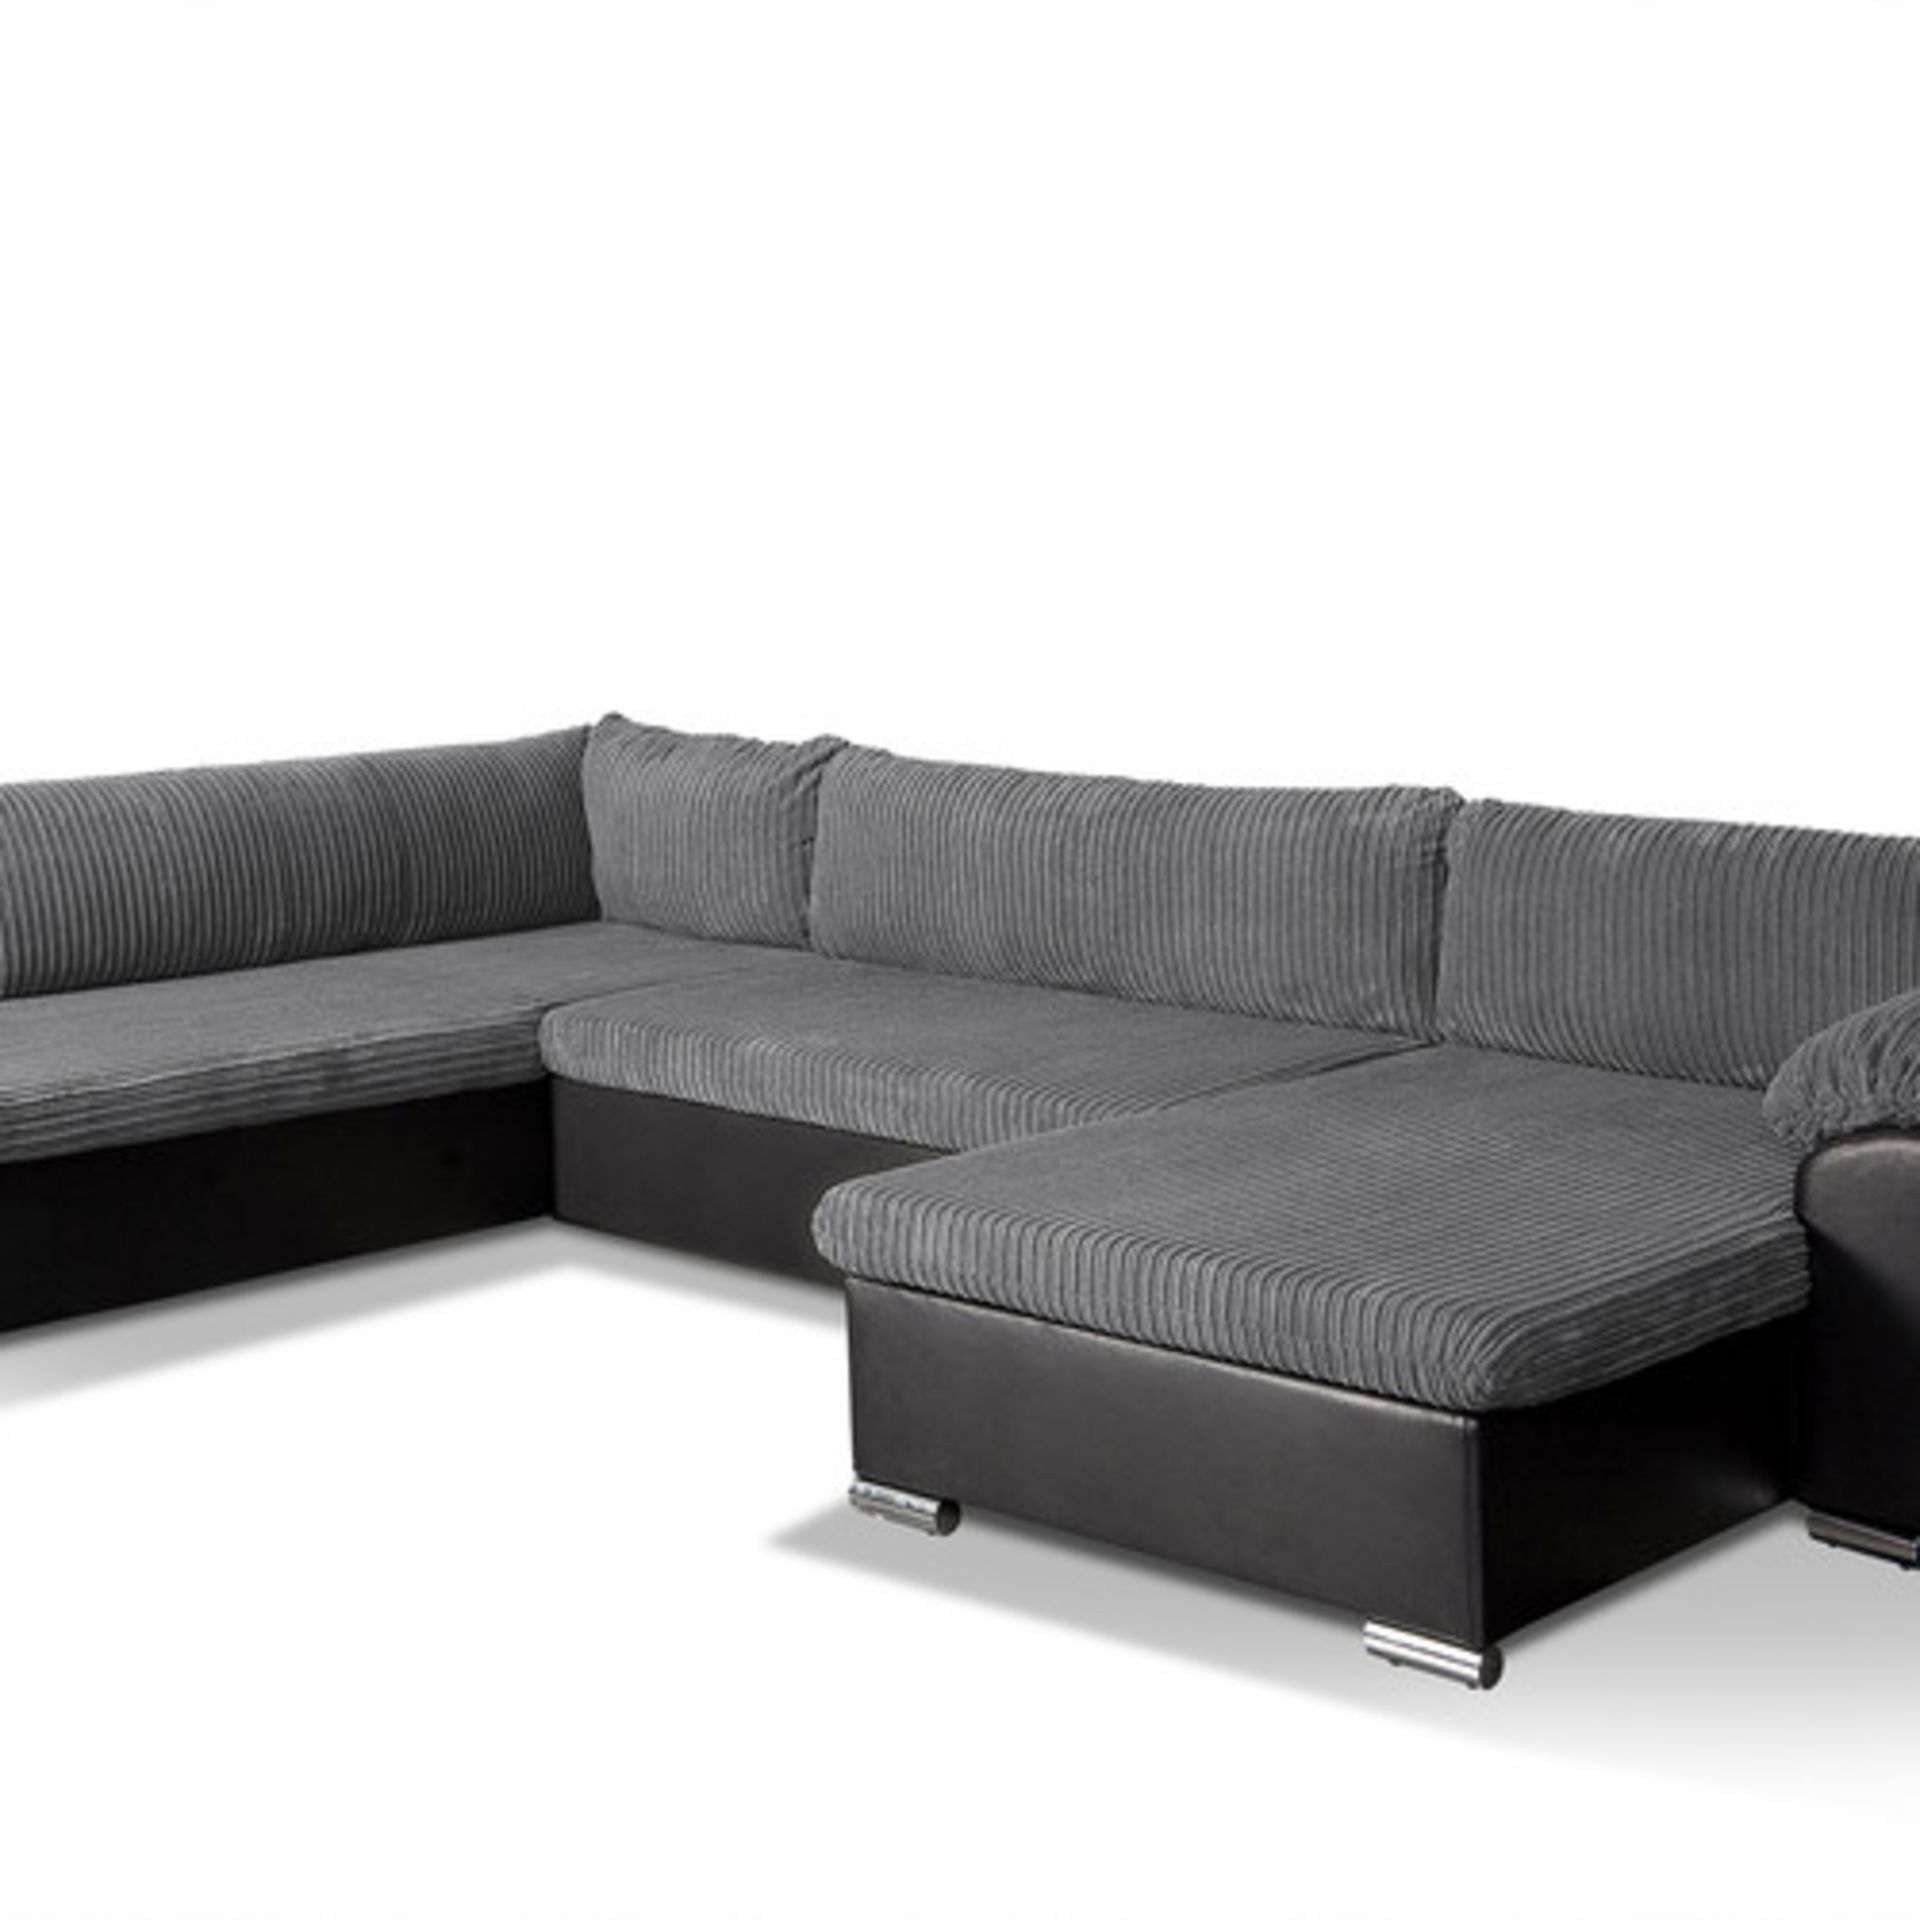 Salerno right hand facing large corner sofa bed in jumbo charcoal and viper black